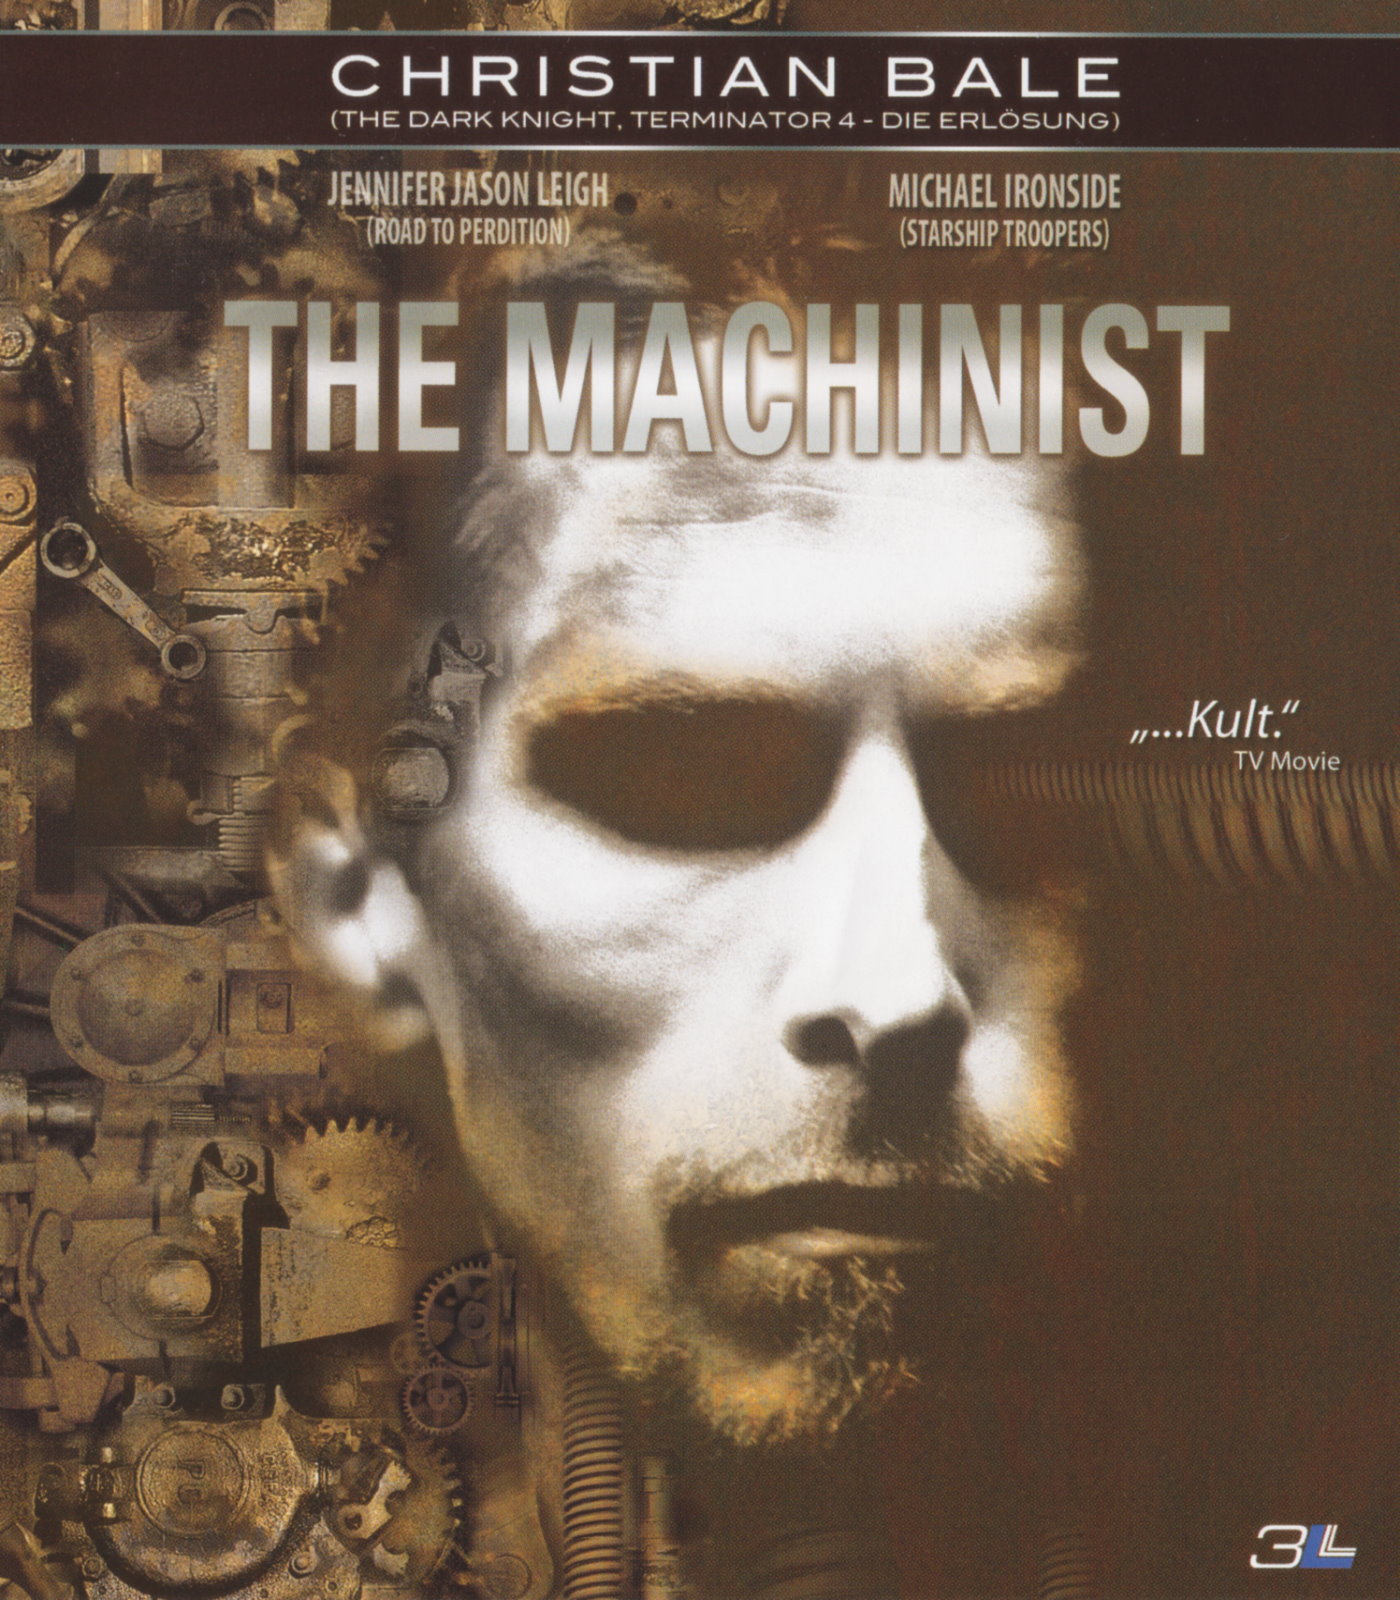 Cover - The Machinist.jpg